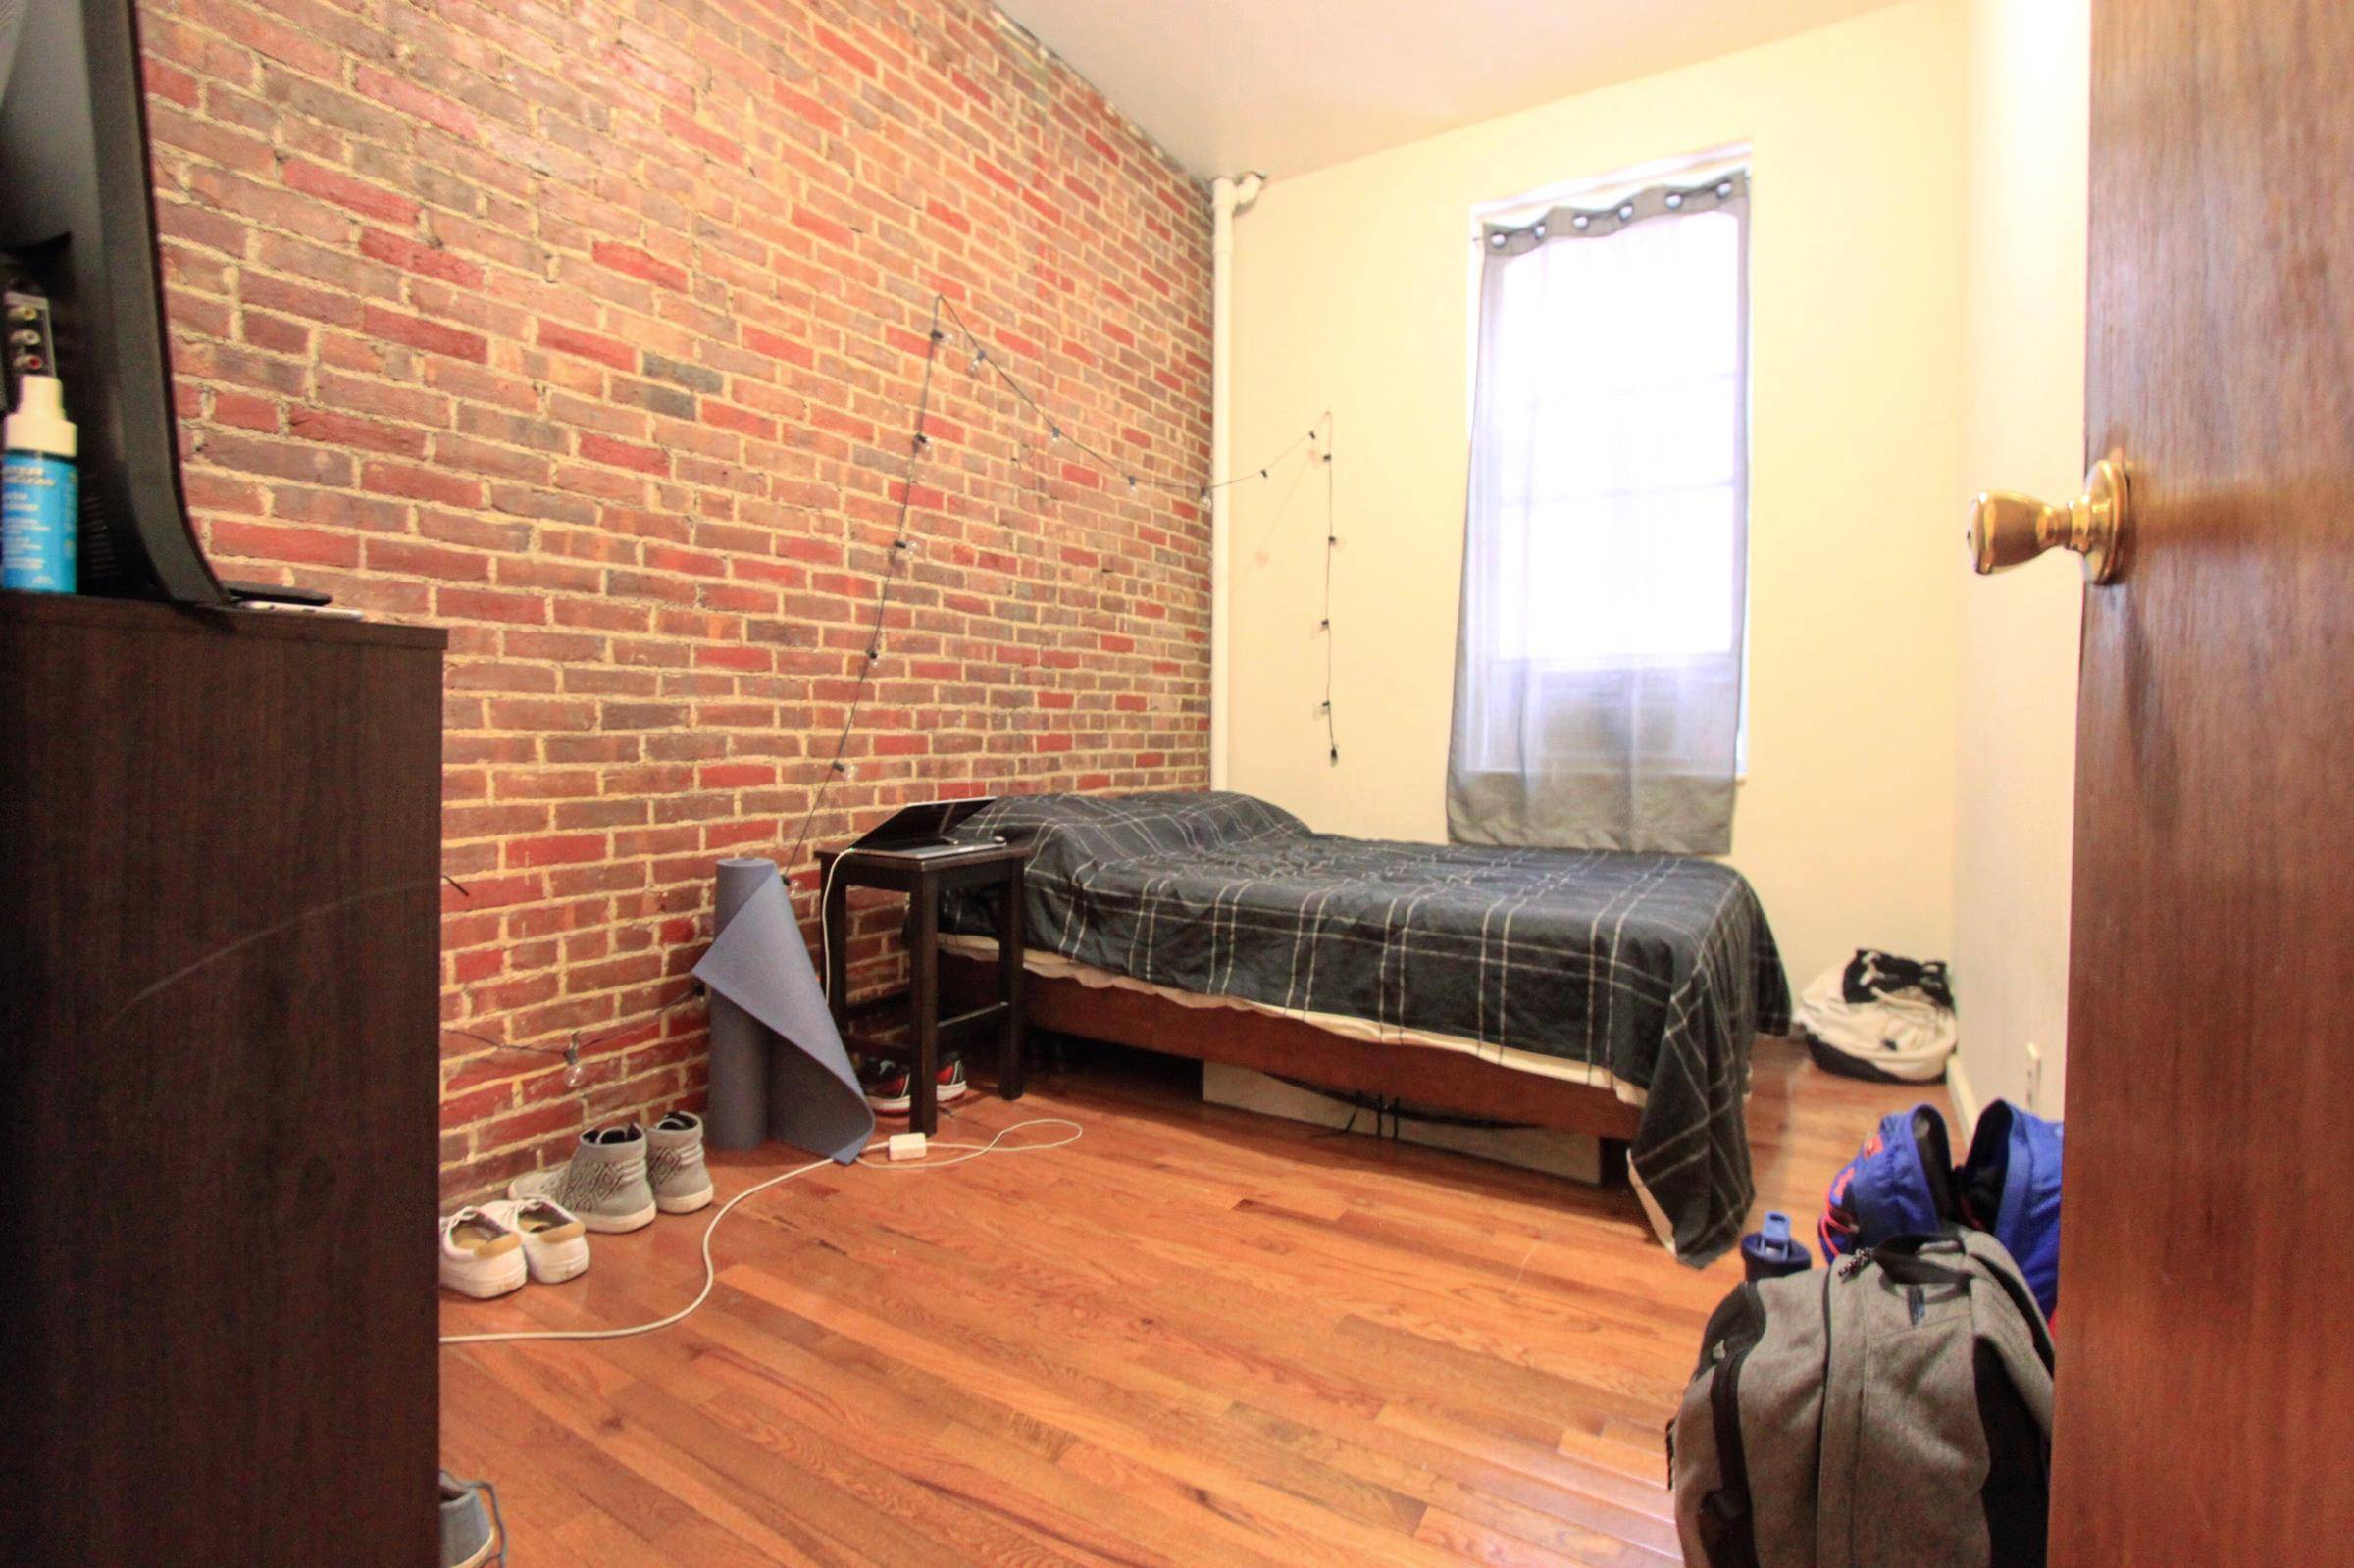 This beautiful winged 2 bedroom apartment sits on one of the most charming blocks in Hell s Kitchen.